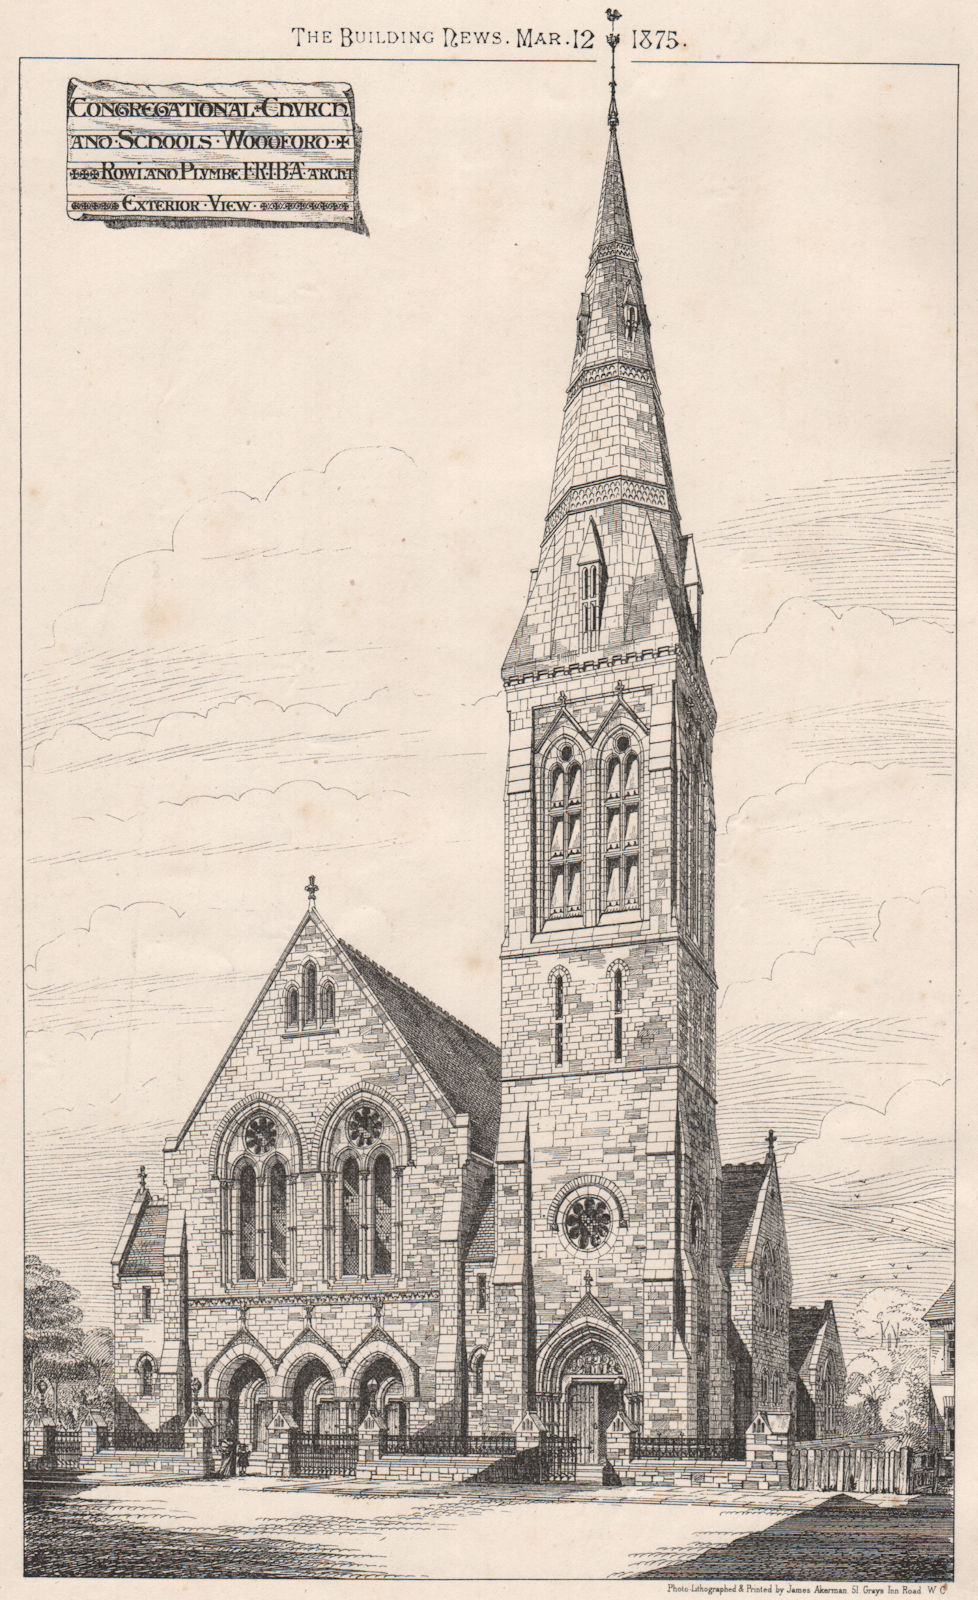 Associate Product Congregational Church & Schools, Woodford; Rowland Plumbe Architect 1875 print